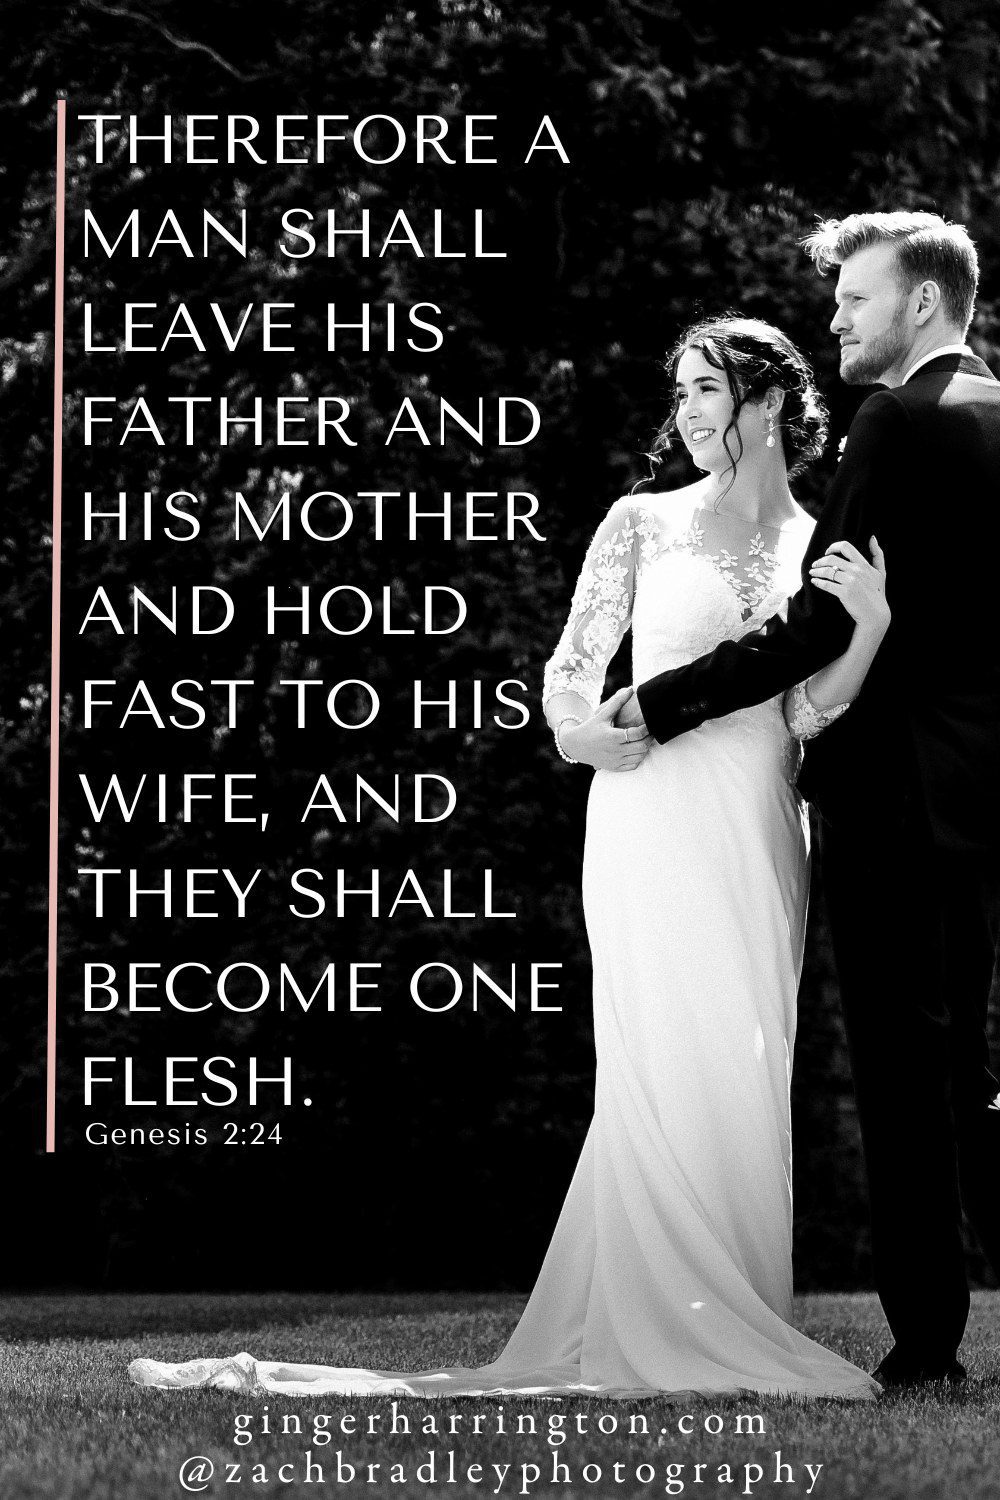 Bride and groom on wedding day illustrates Genesis 2:24, a popular verse for weddings